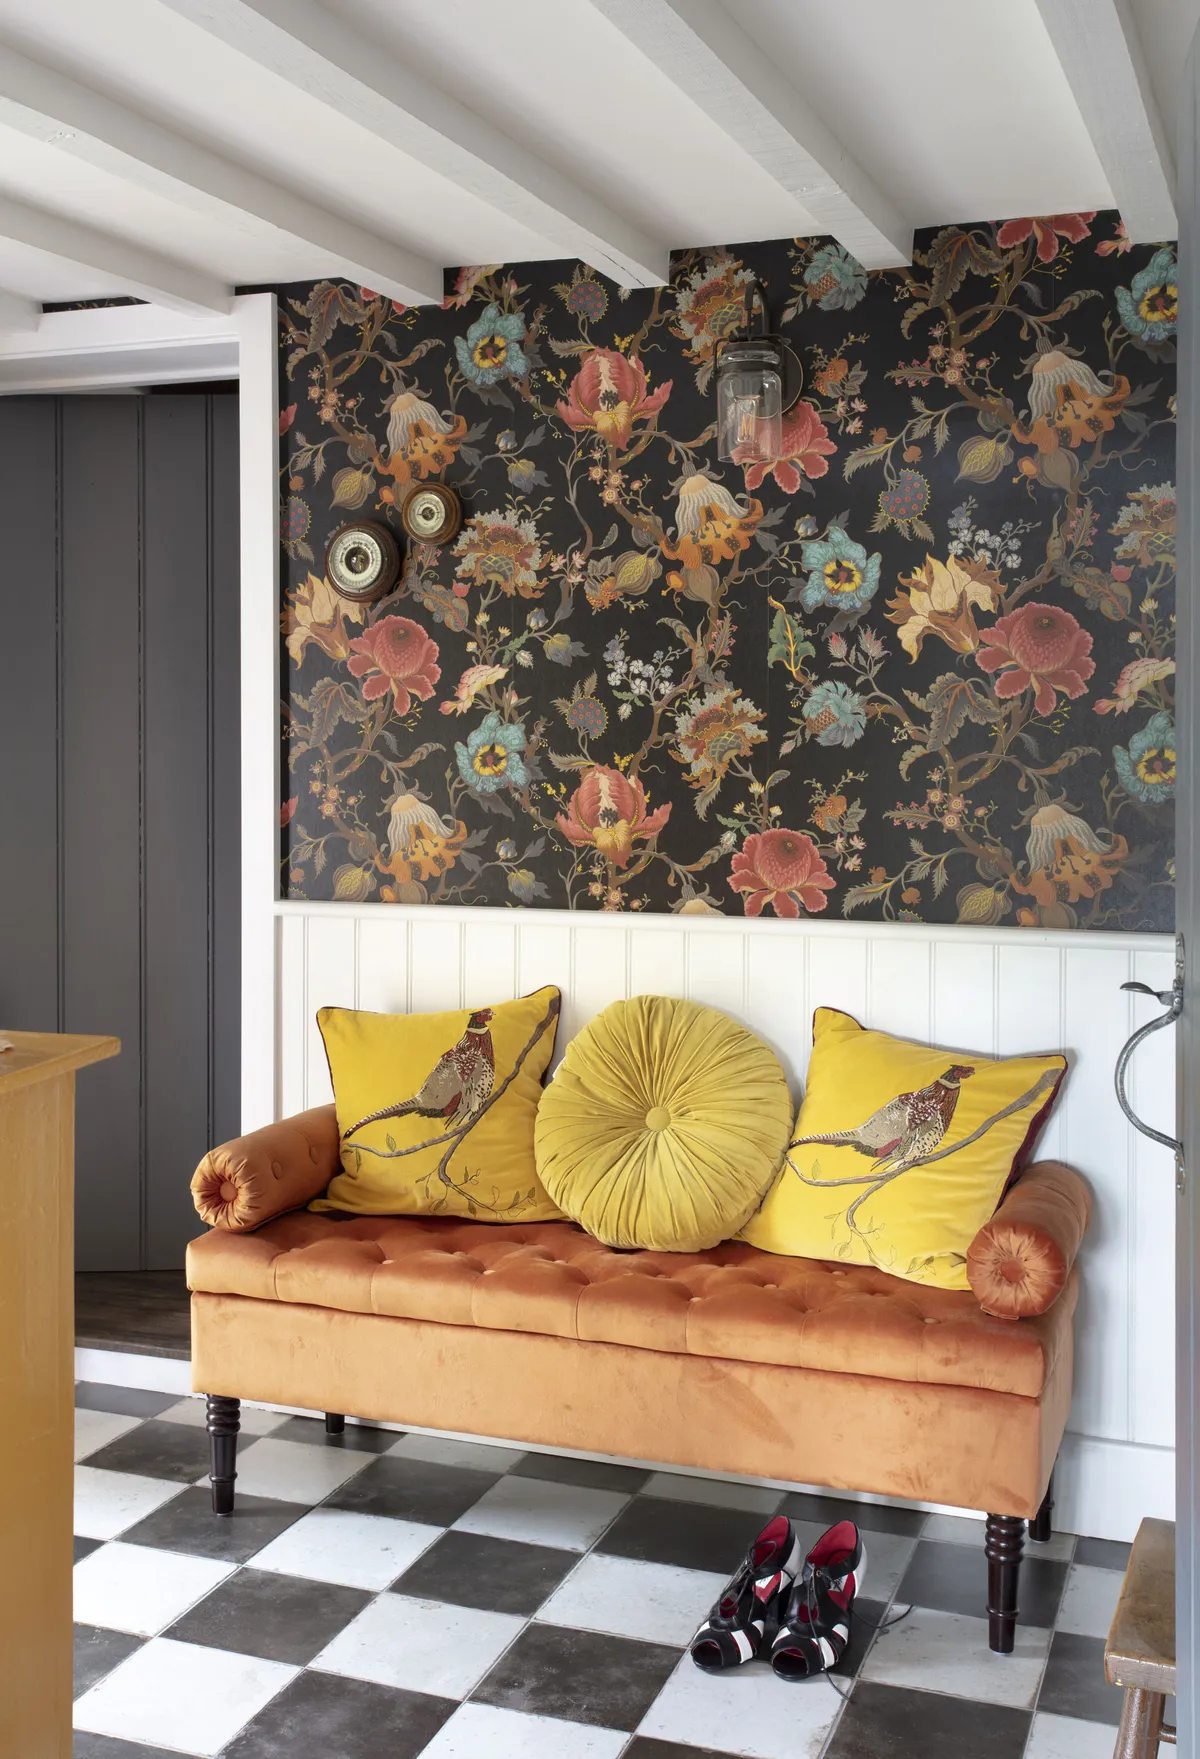 A handy seat fits snugly in the space between the door to the living room and a storage cupboard. Sabrina chose an exact orange shade from the wallpaper and added mustard cushions to make it cosy